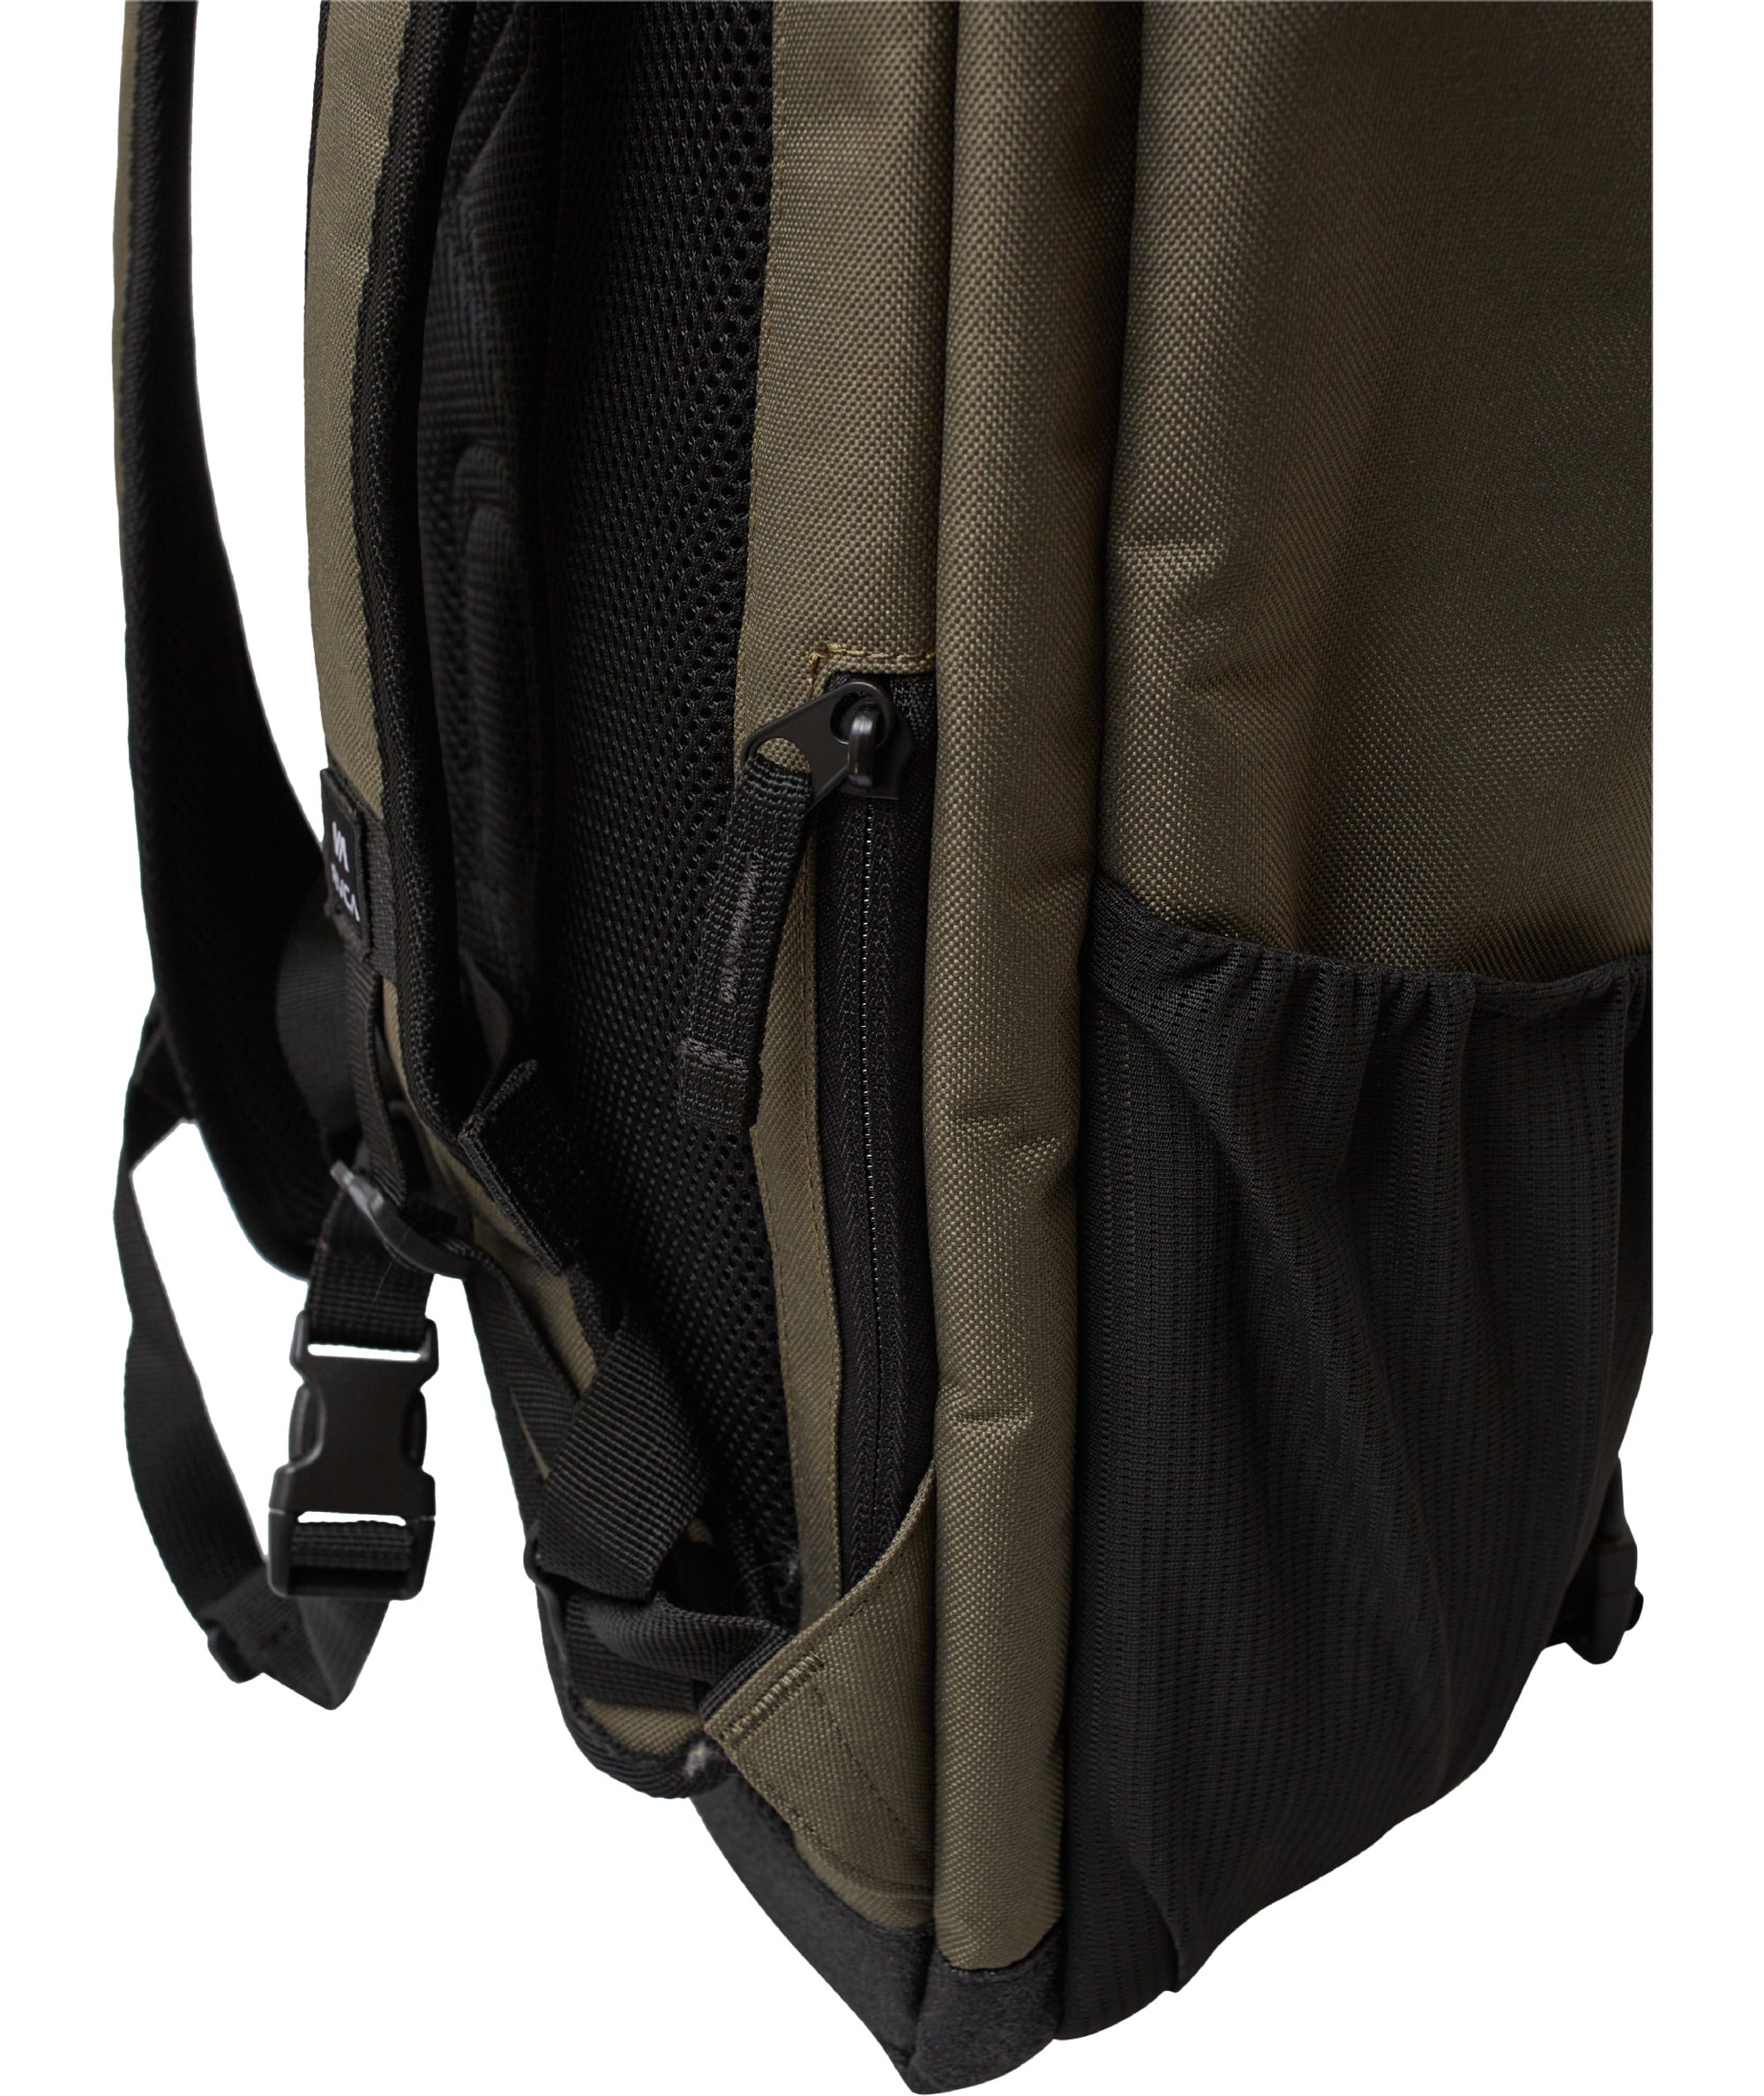 RVCA VOYAGE BACKPACK IV